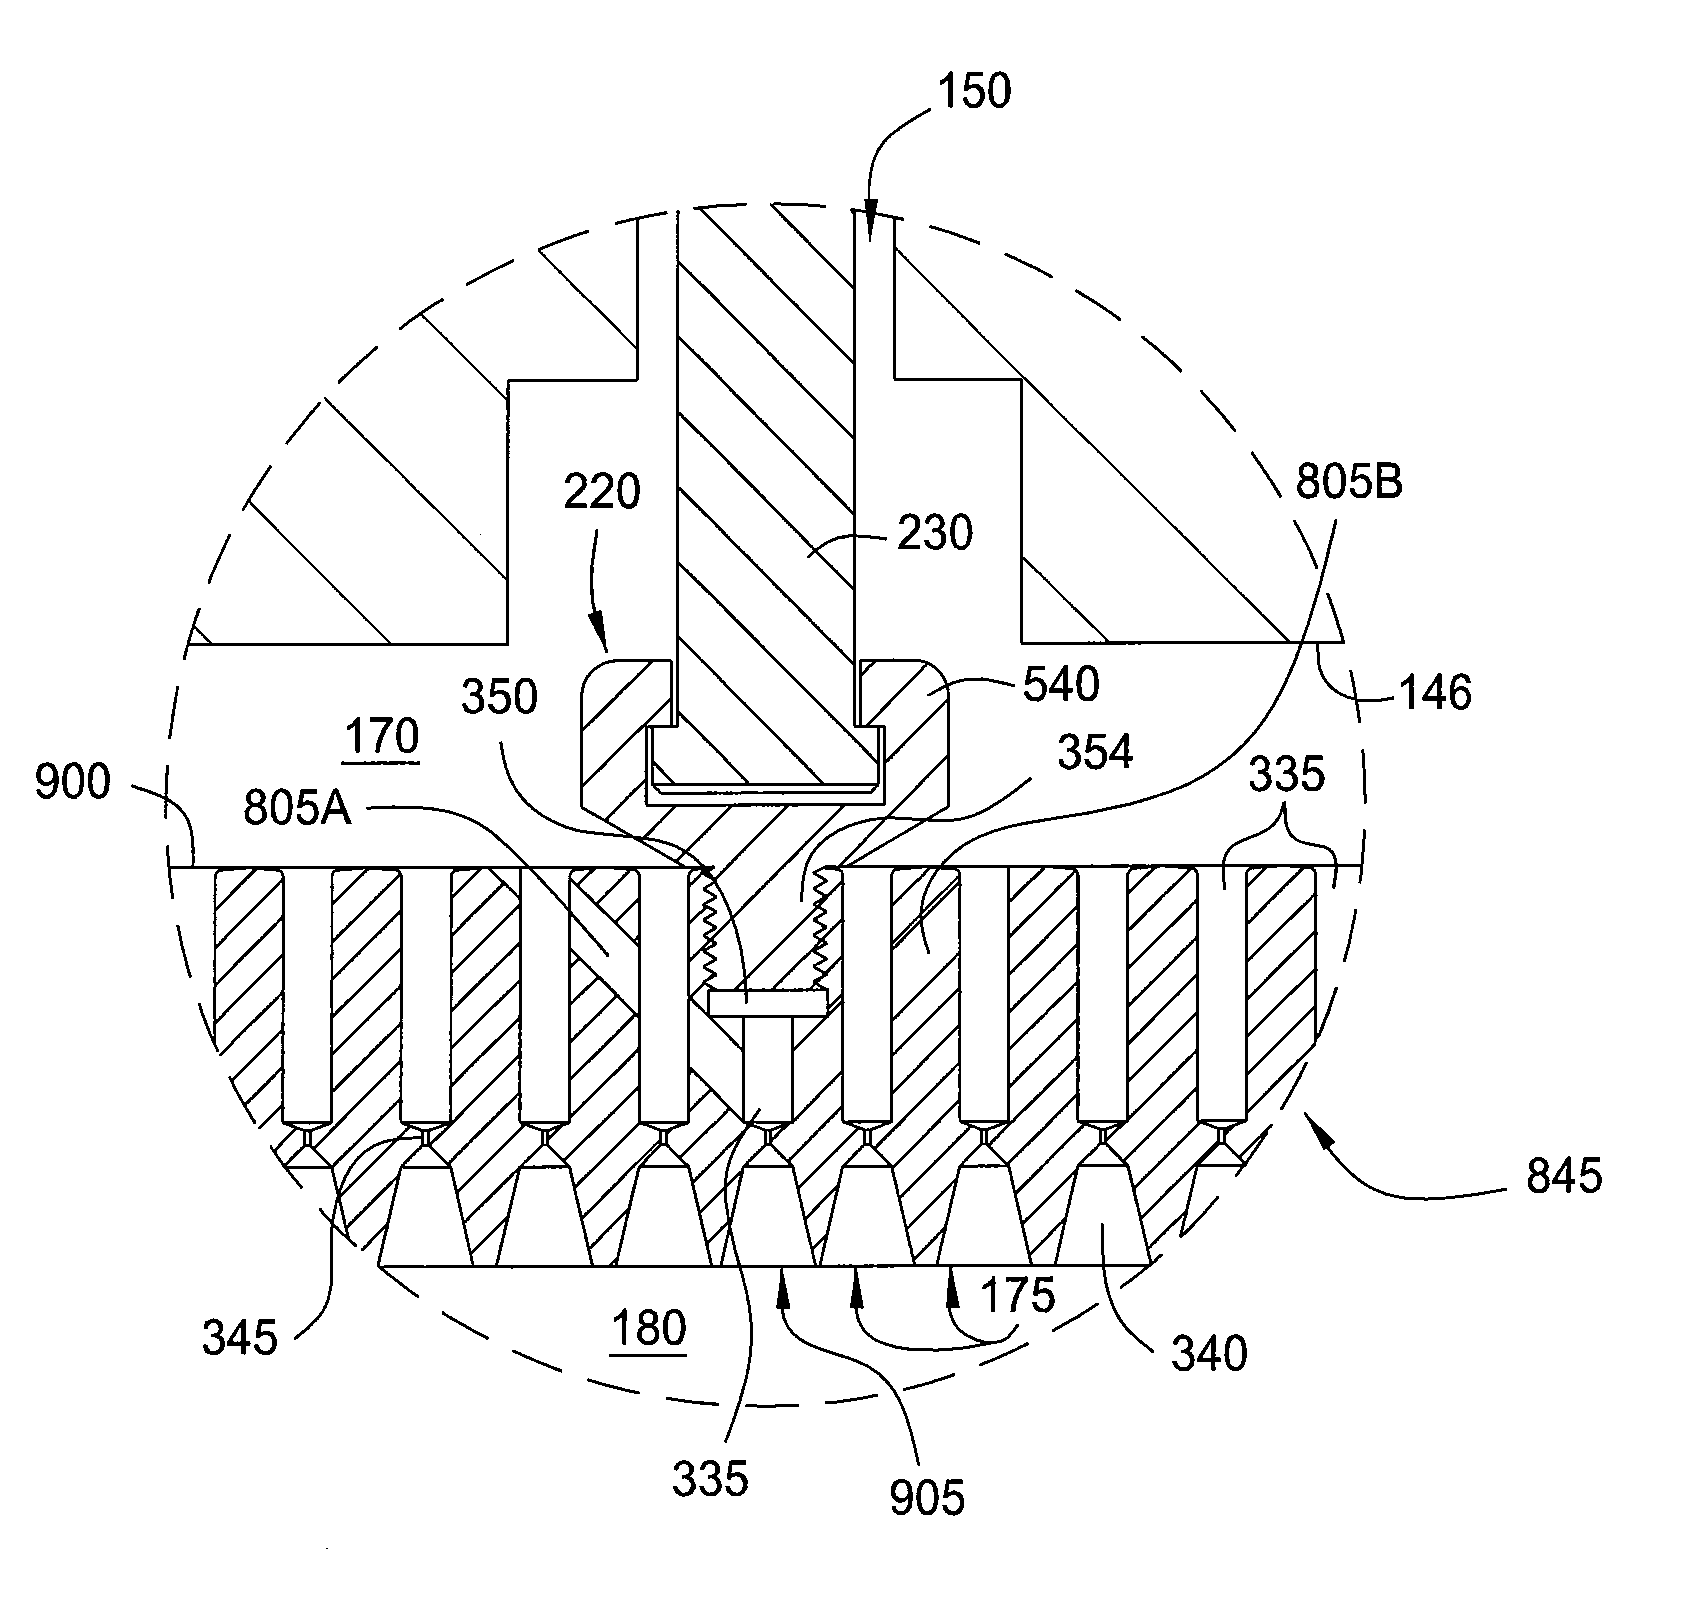 Showerhead support structure for improved gas flow